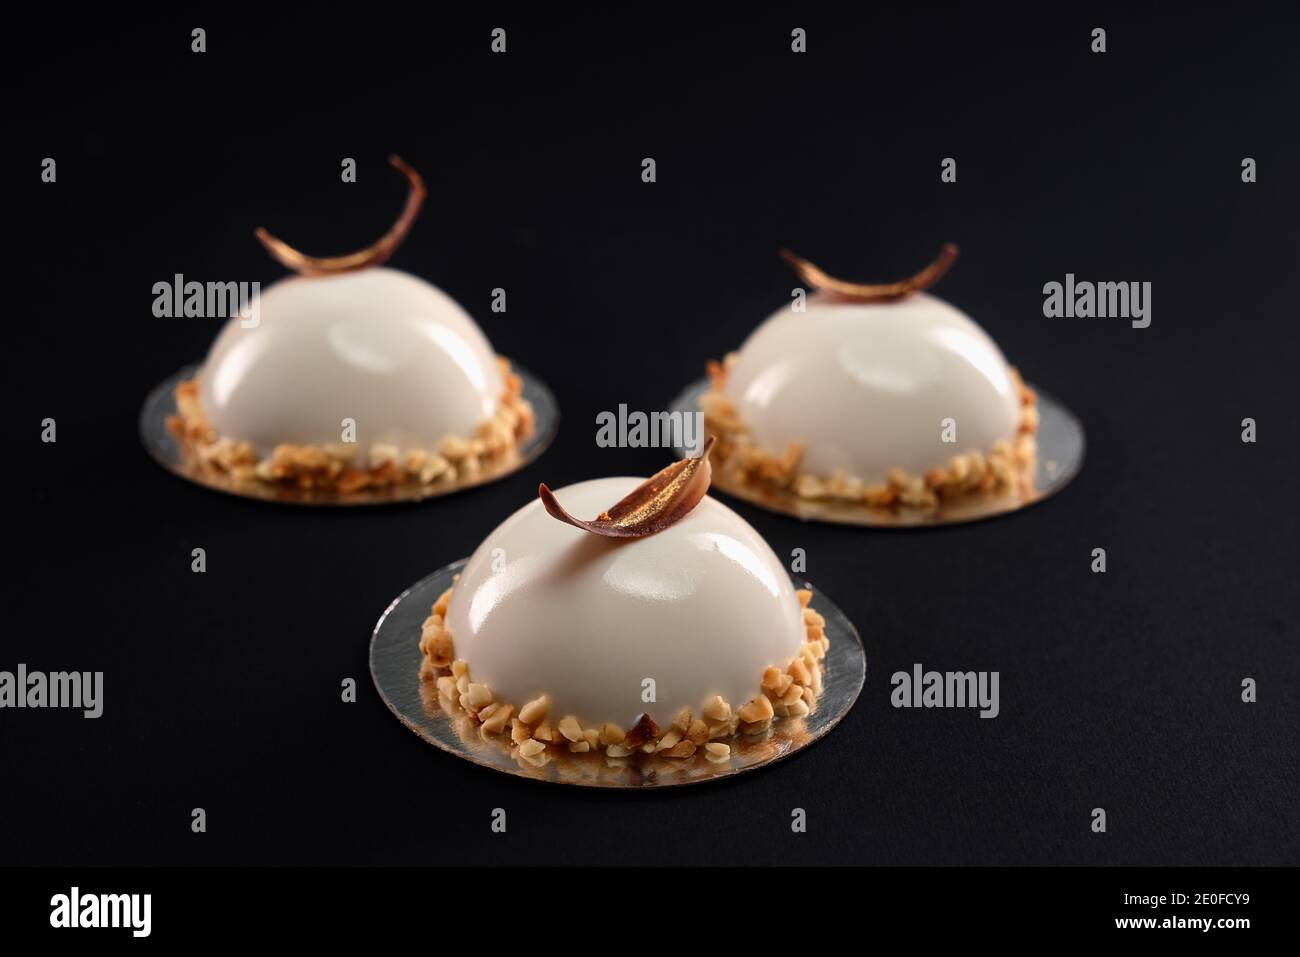 White half sphere cakes decorated with nuts and chocolate feather isolated on black background. Dessert with smooth surface, mousse and mirror glaze. Tasty sweet dish in cafeteria. Stock Photo